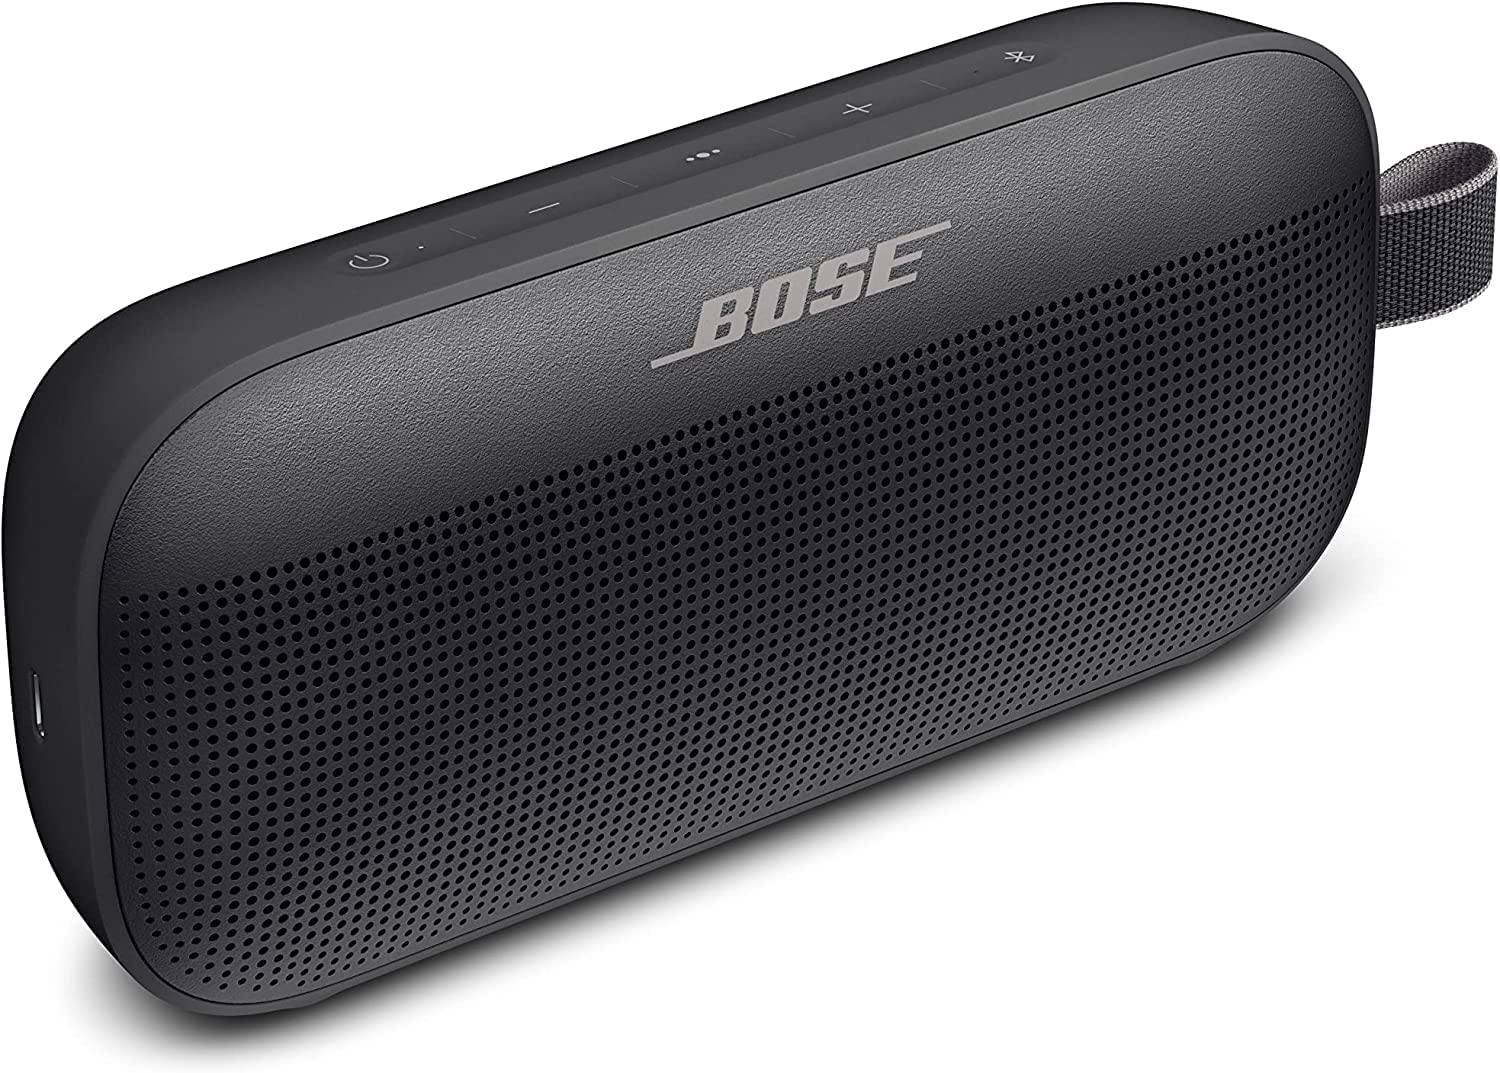 Deal Alert! Bose Portable Bluetooth Speakers Are on Sale!